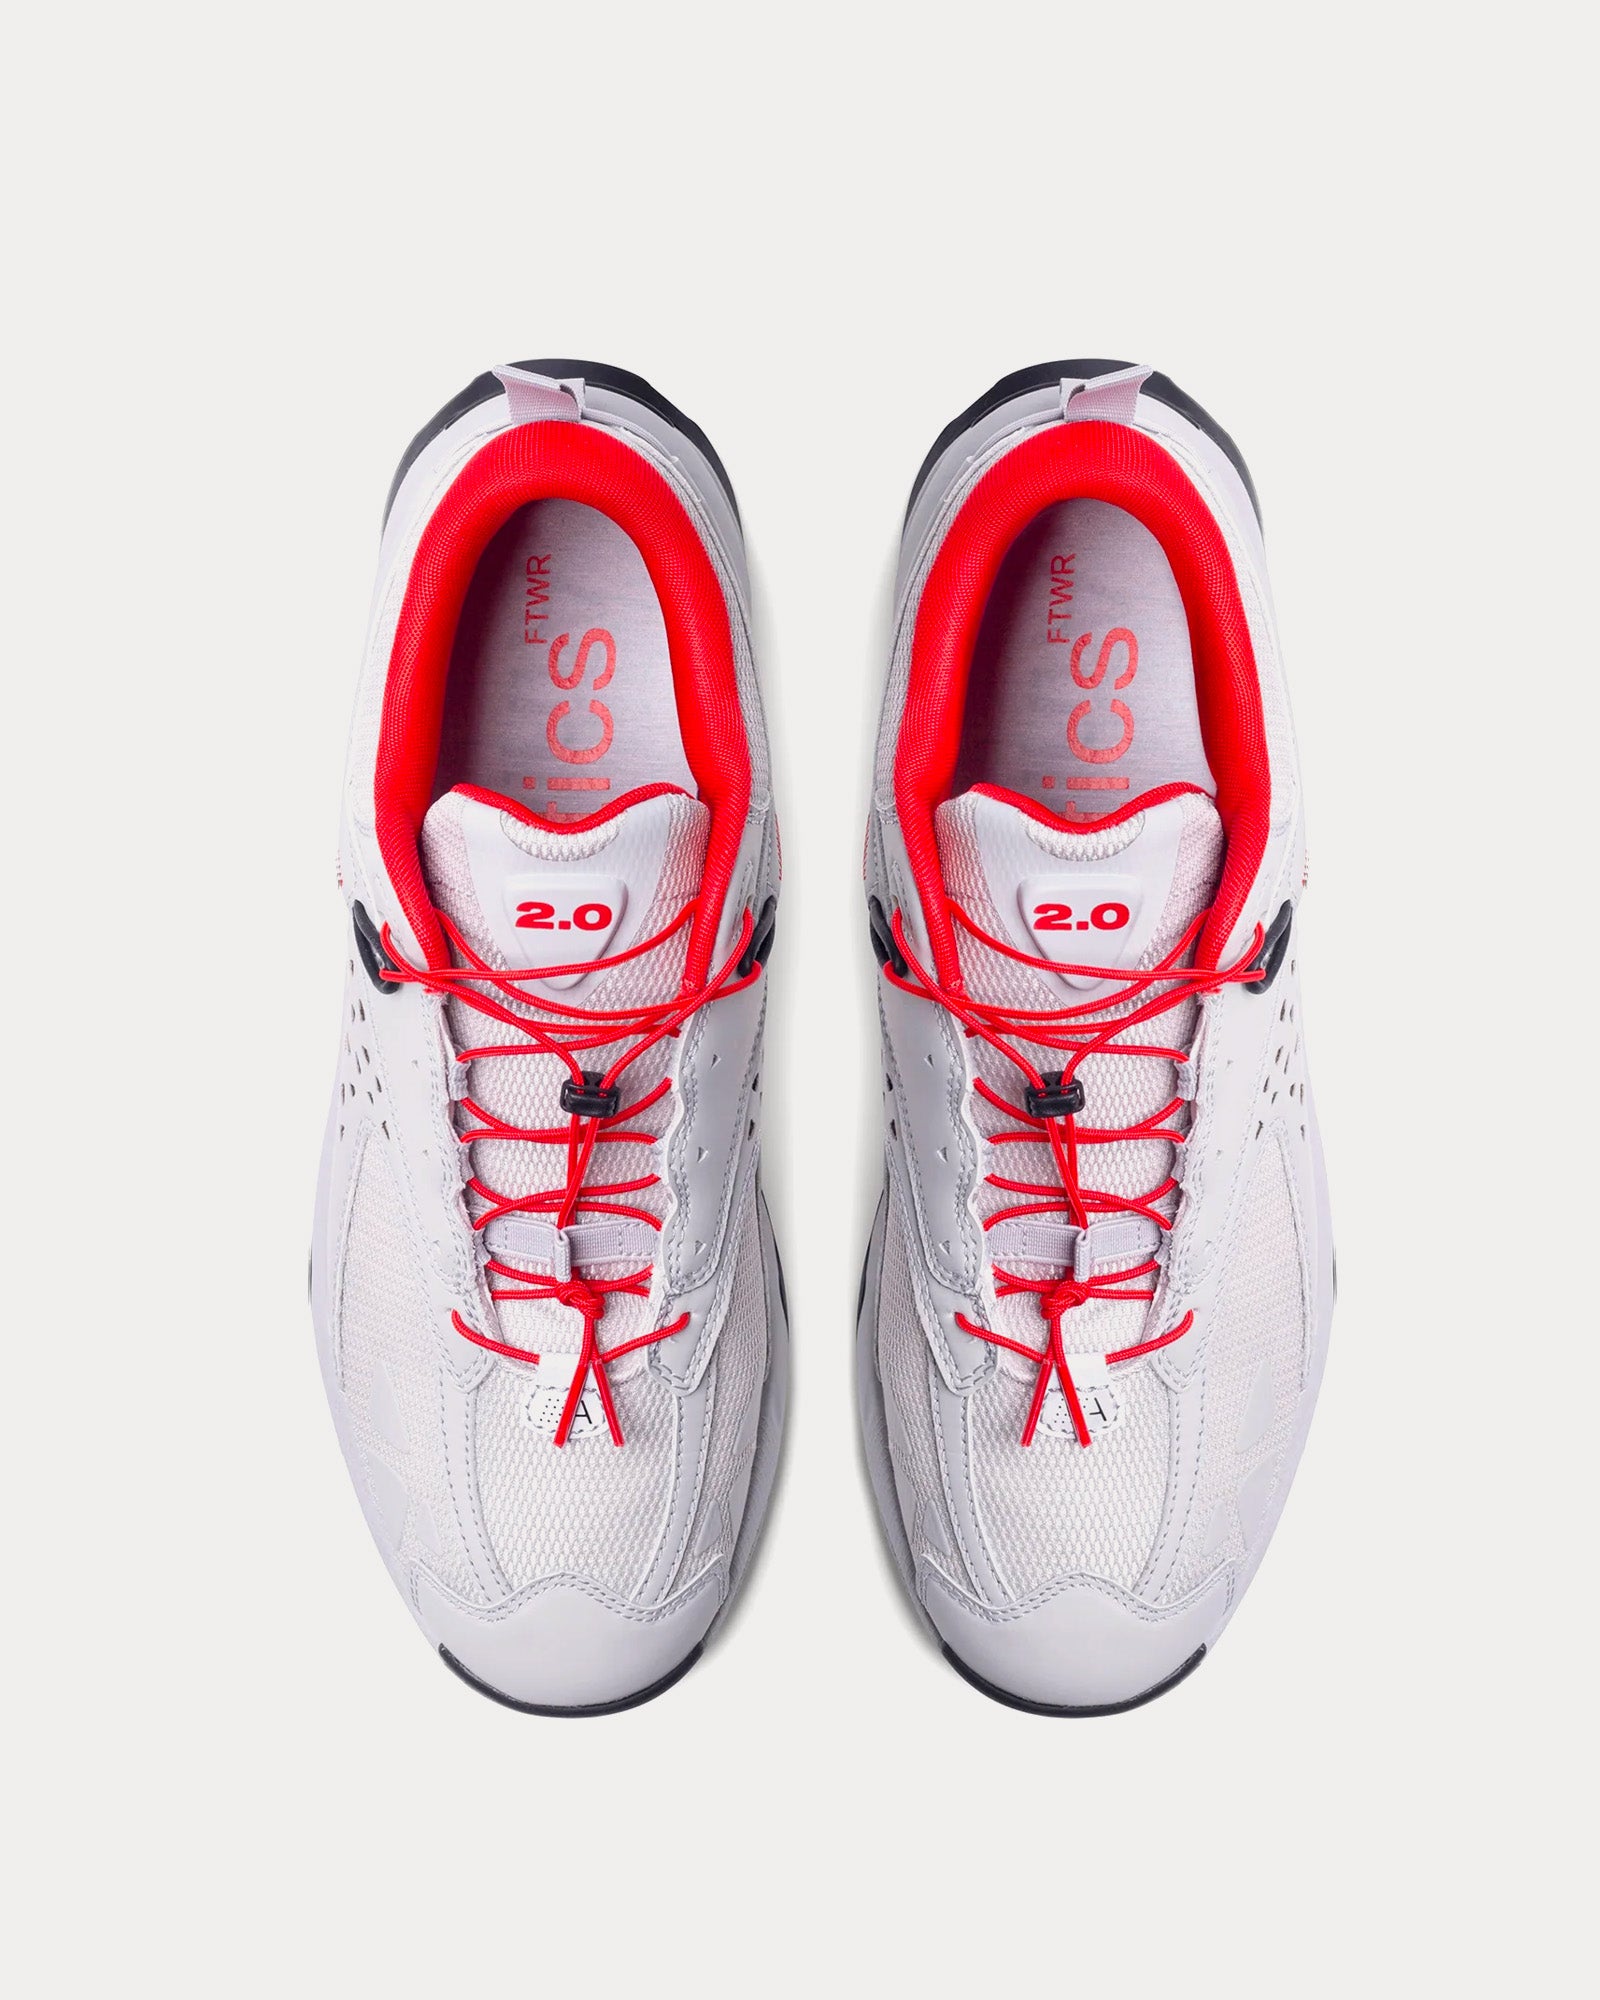 Athletics FTWR - 2.0 North Grey / High Risk Red Low Top Sneakers